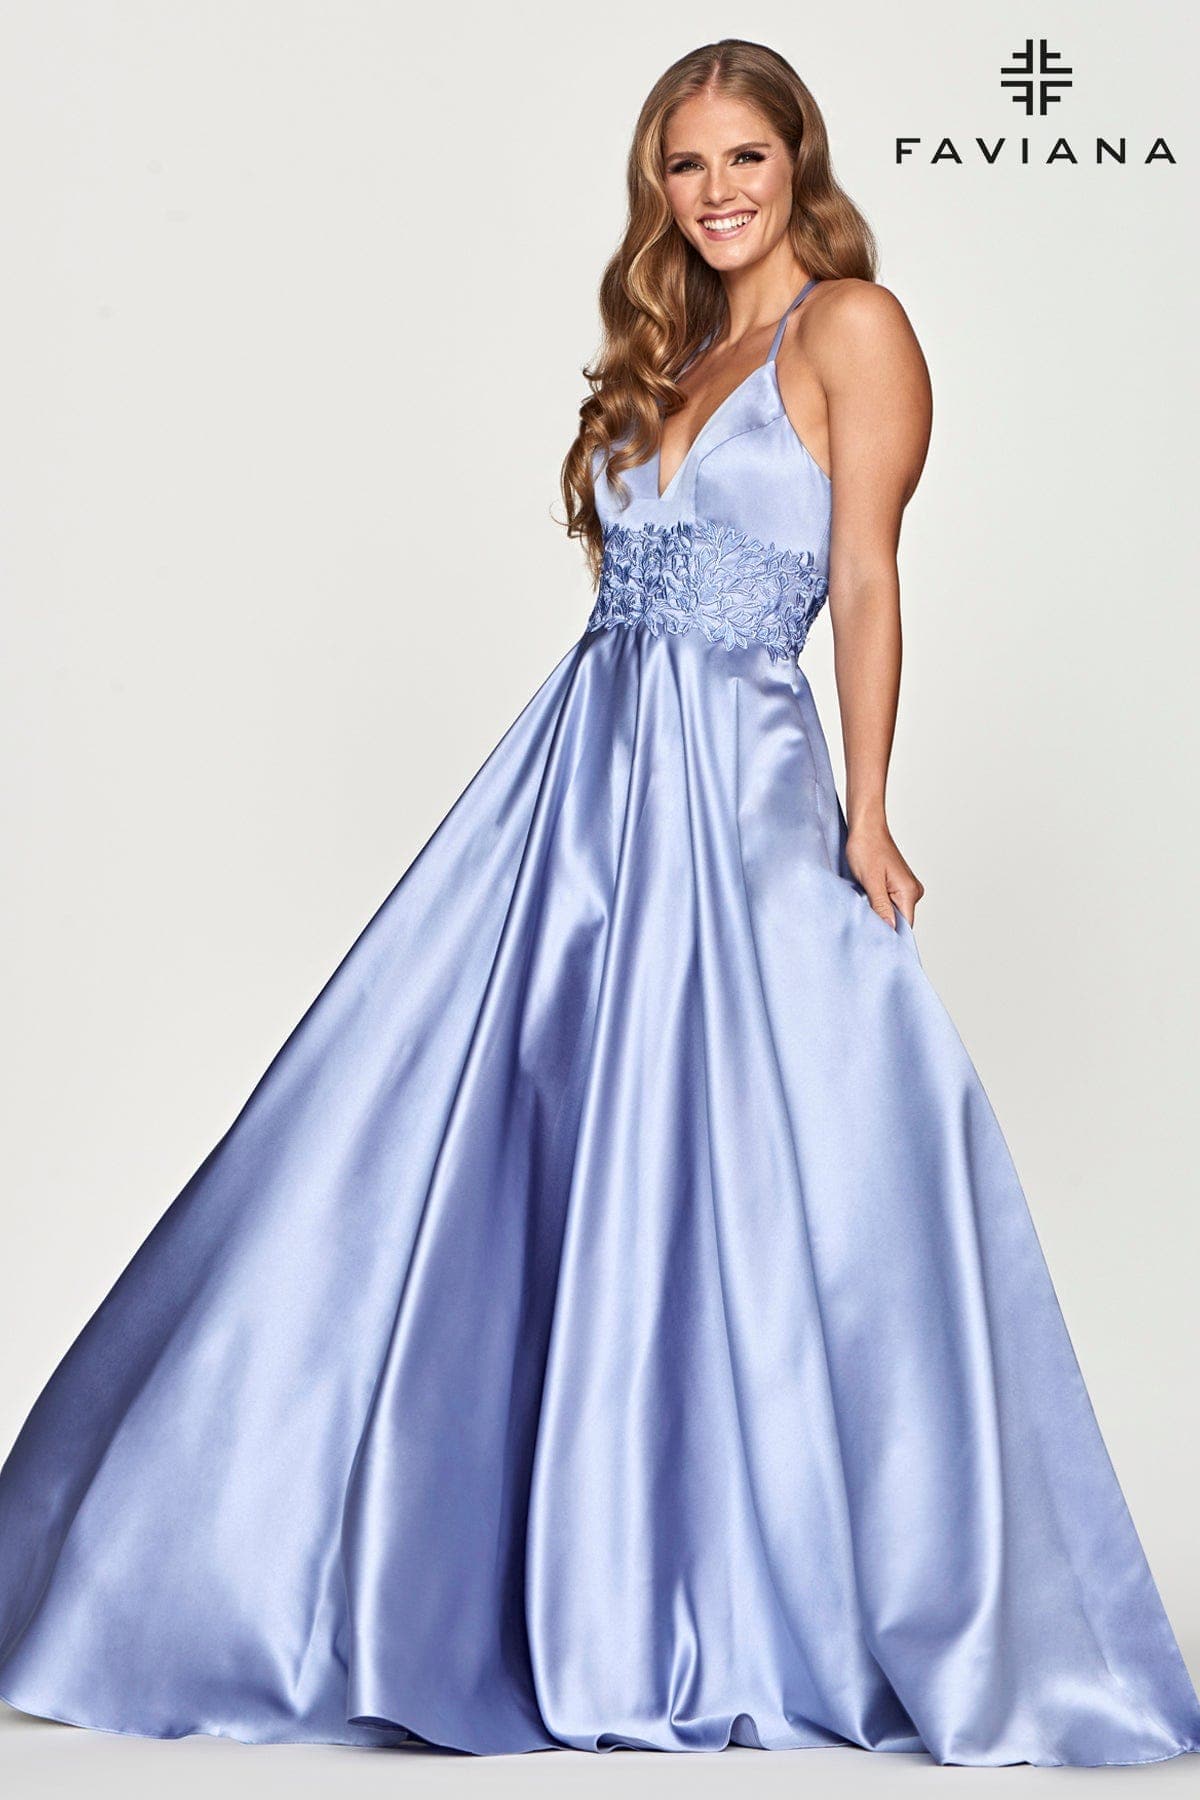 Satin Ball Gown With Lace Applique And Corset Back